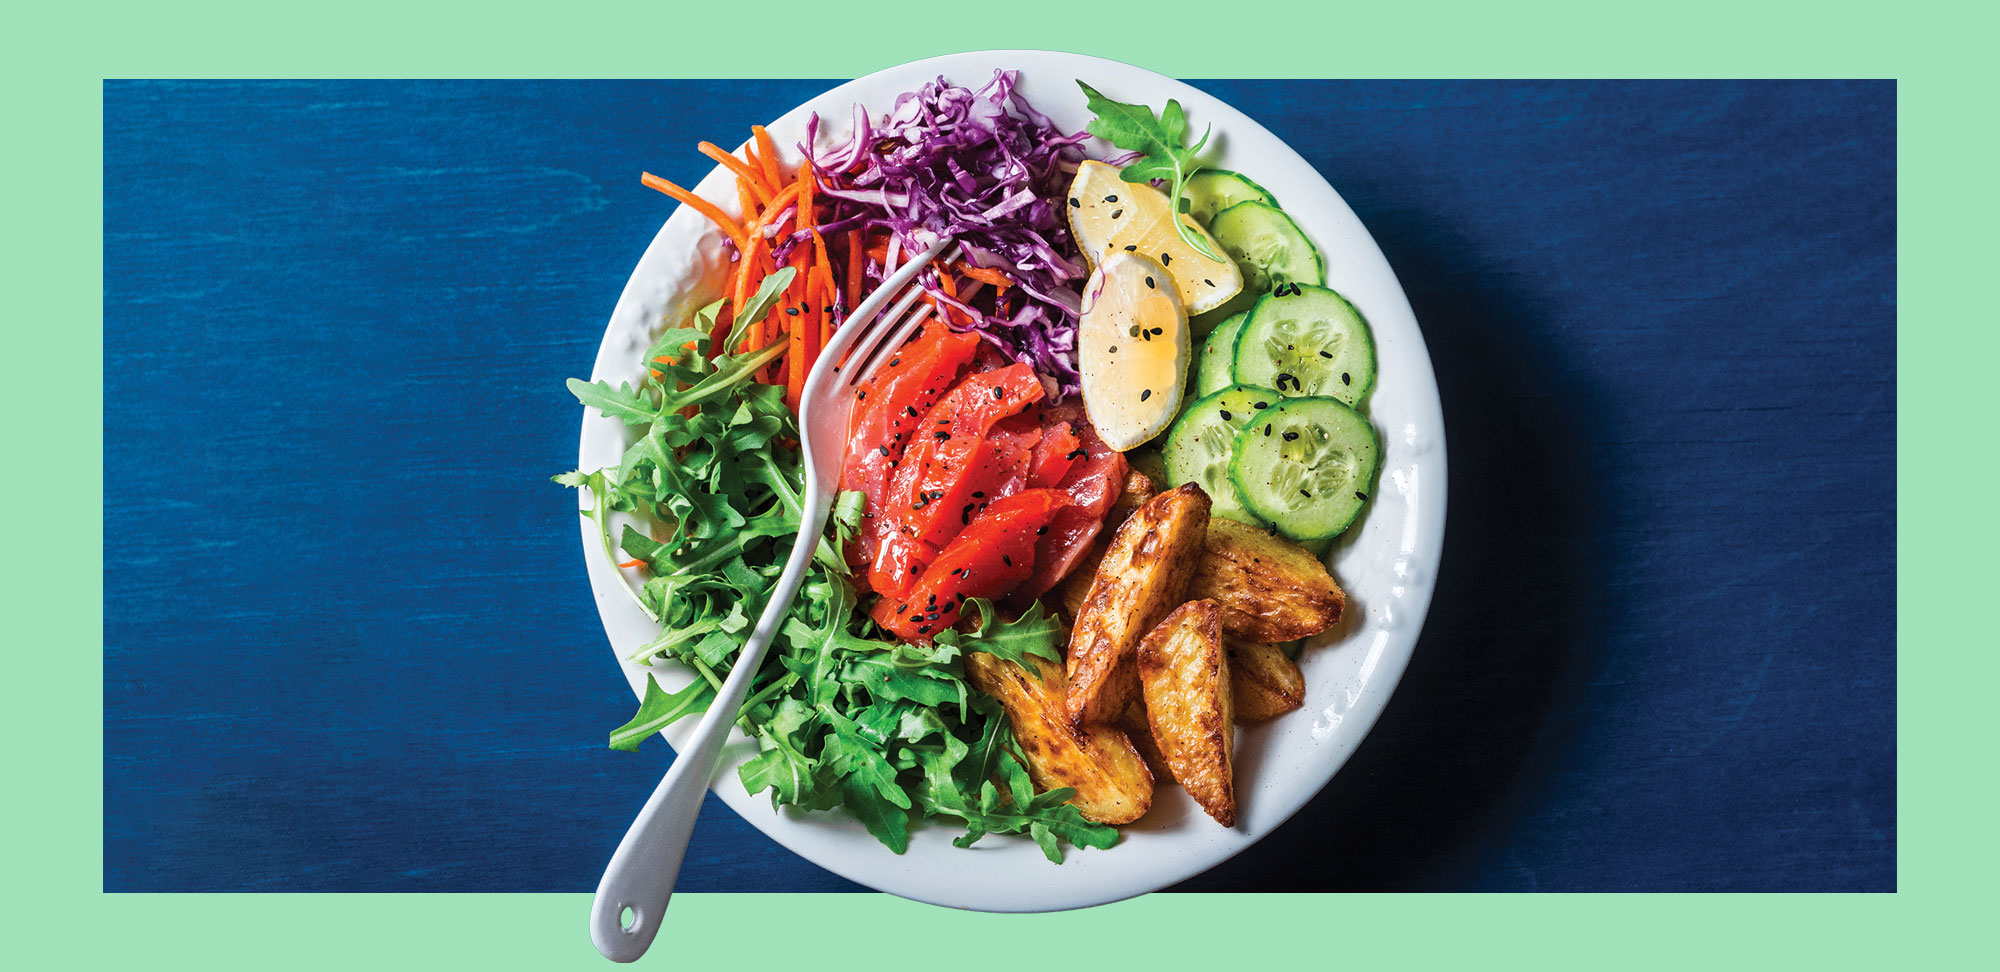 Photo of Smoked salmon, baked potatoes, vegetables buddha power bowl on blue background, top view. Red cabbage, carrots, arugula, potatoes, smoked salmon fish bowl.